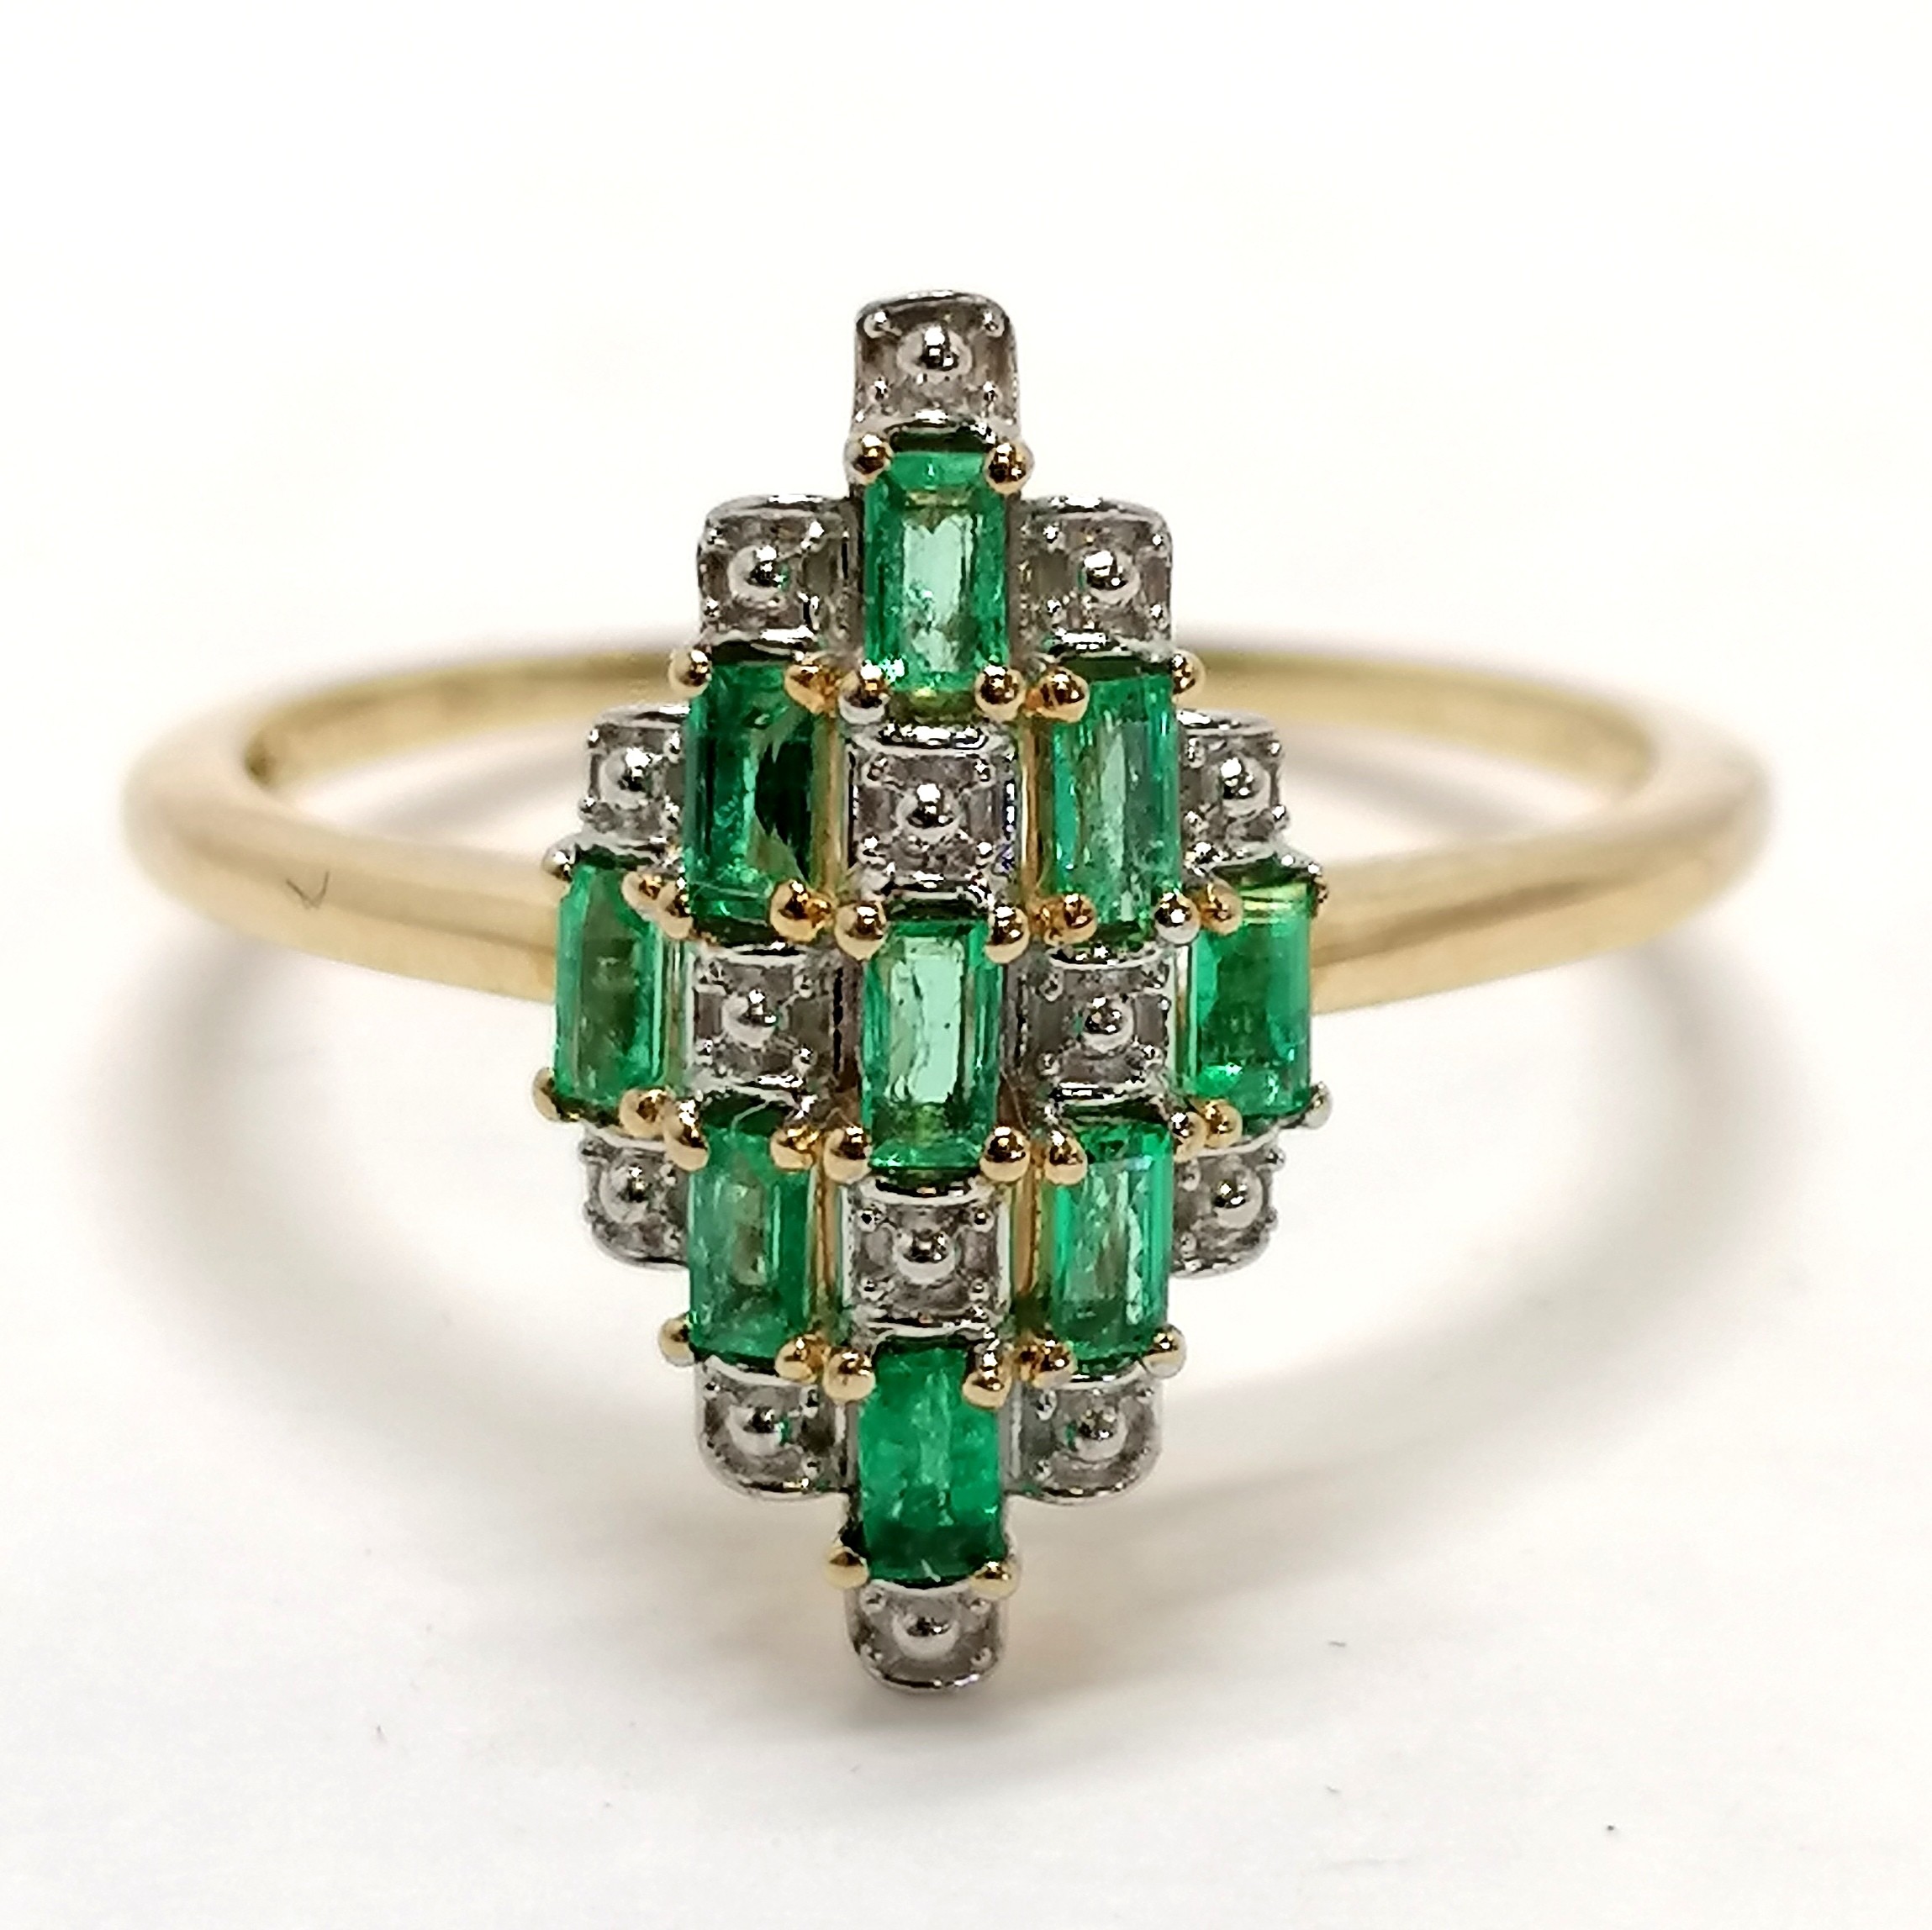 10ct marked gold Colombian emerald & diamond ring - size S & 2.4g total weight (with Gemporia